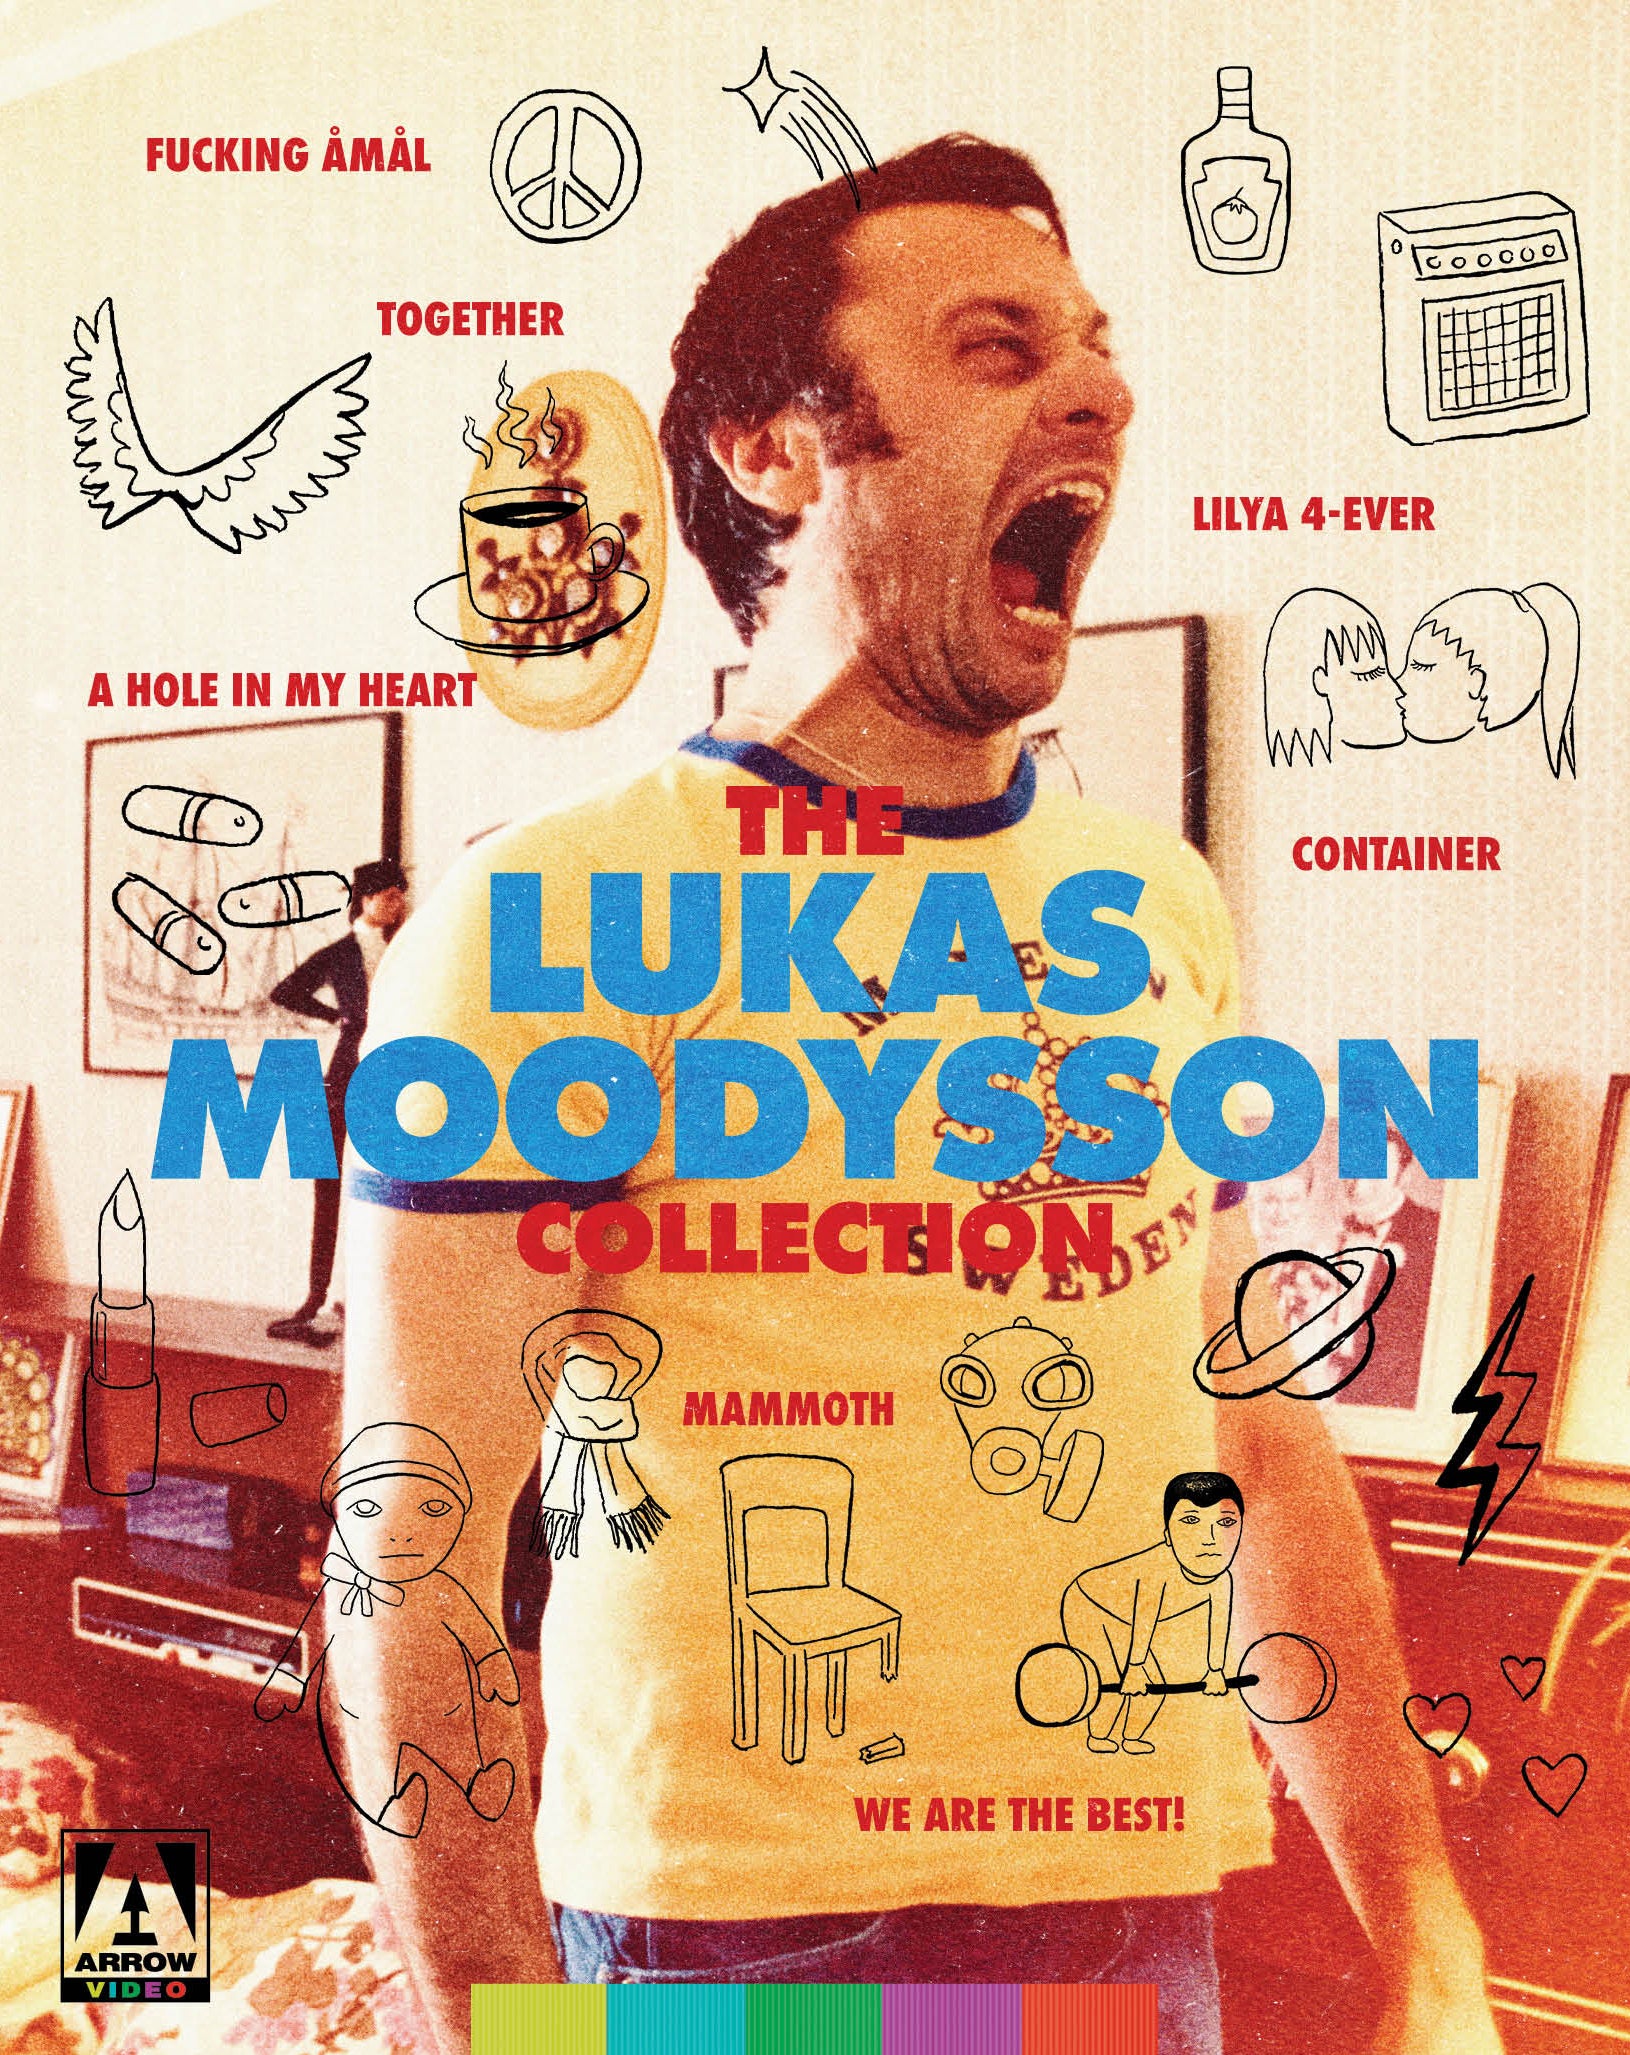 THE LUCAS MOODYSSON COLLECTION (LIMITED EDITION) BLU-RAY